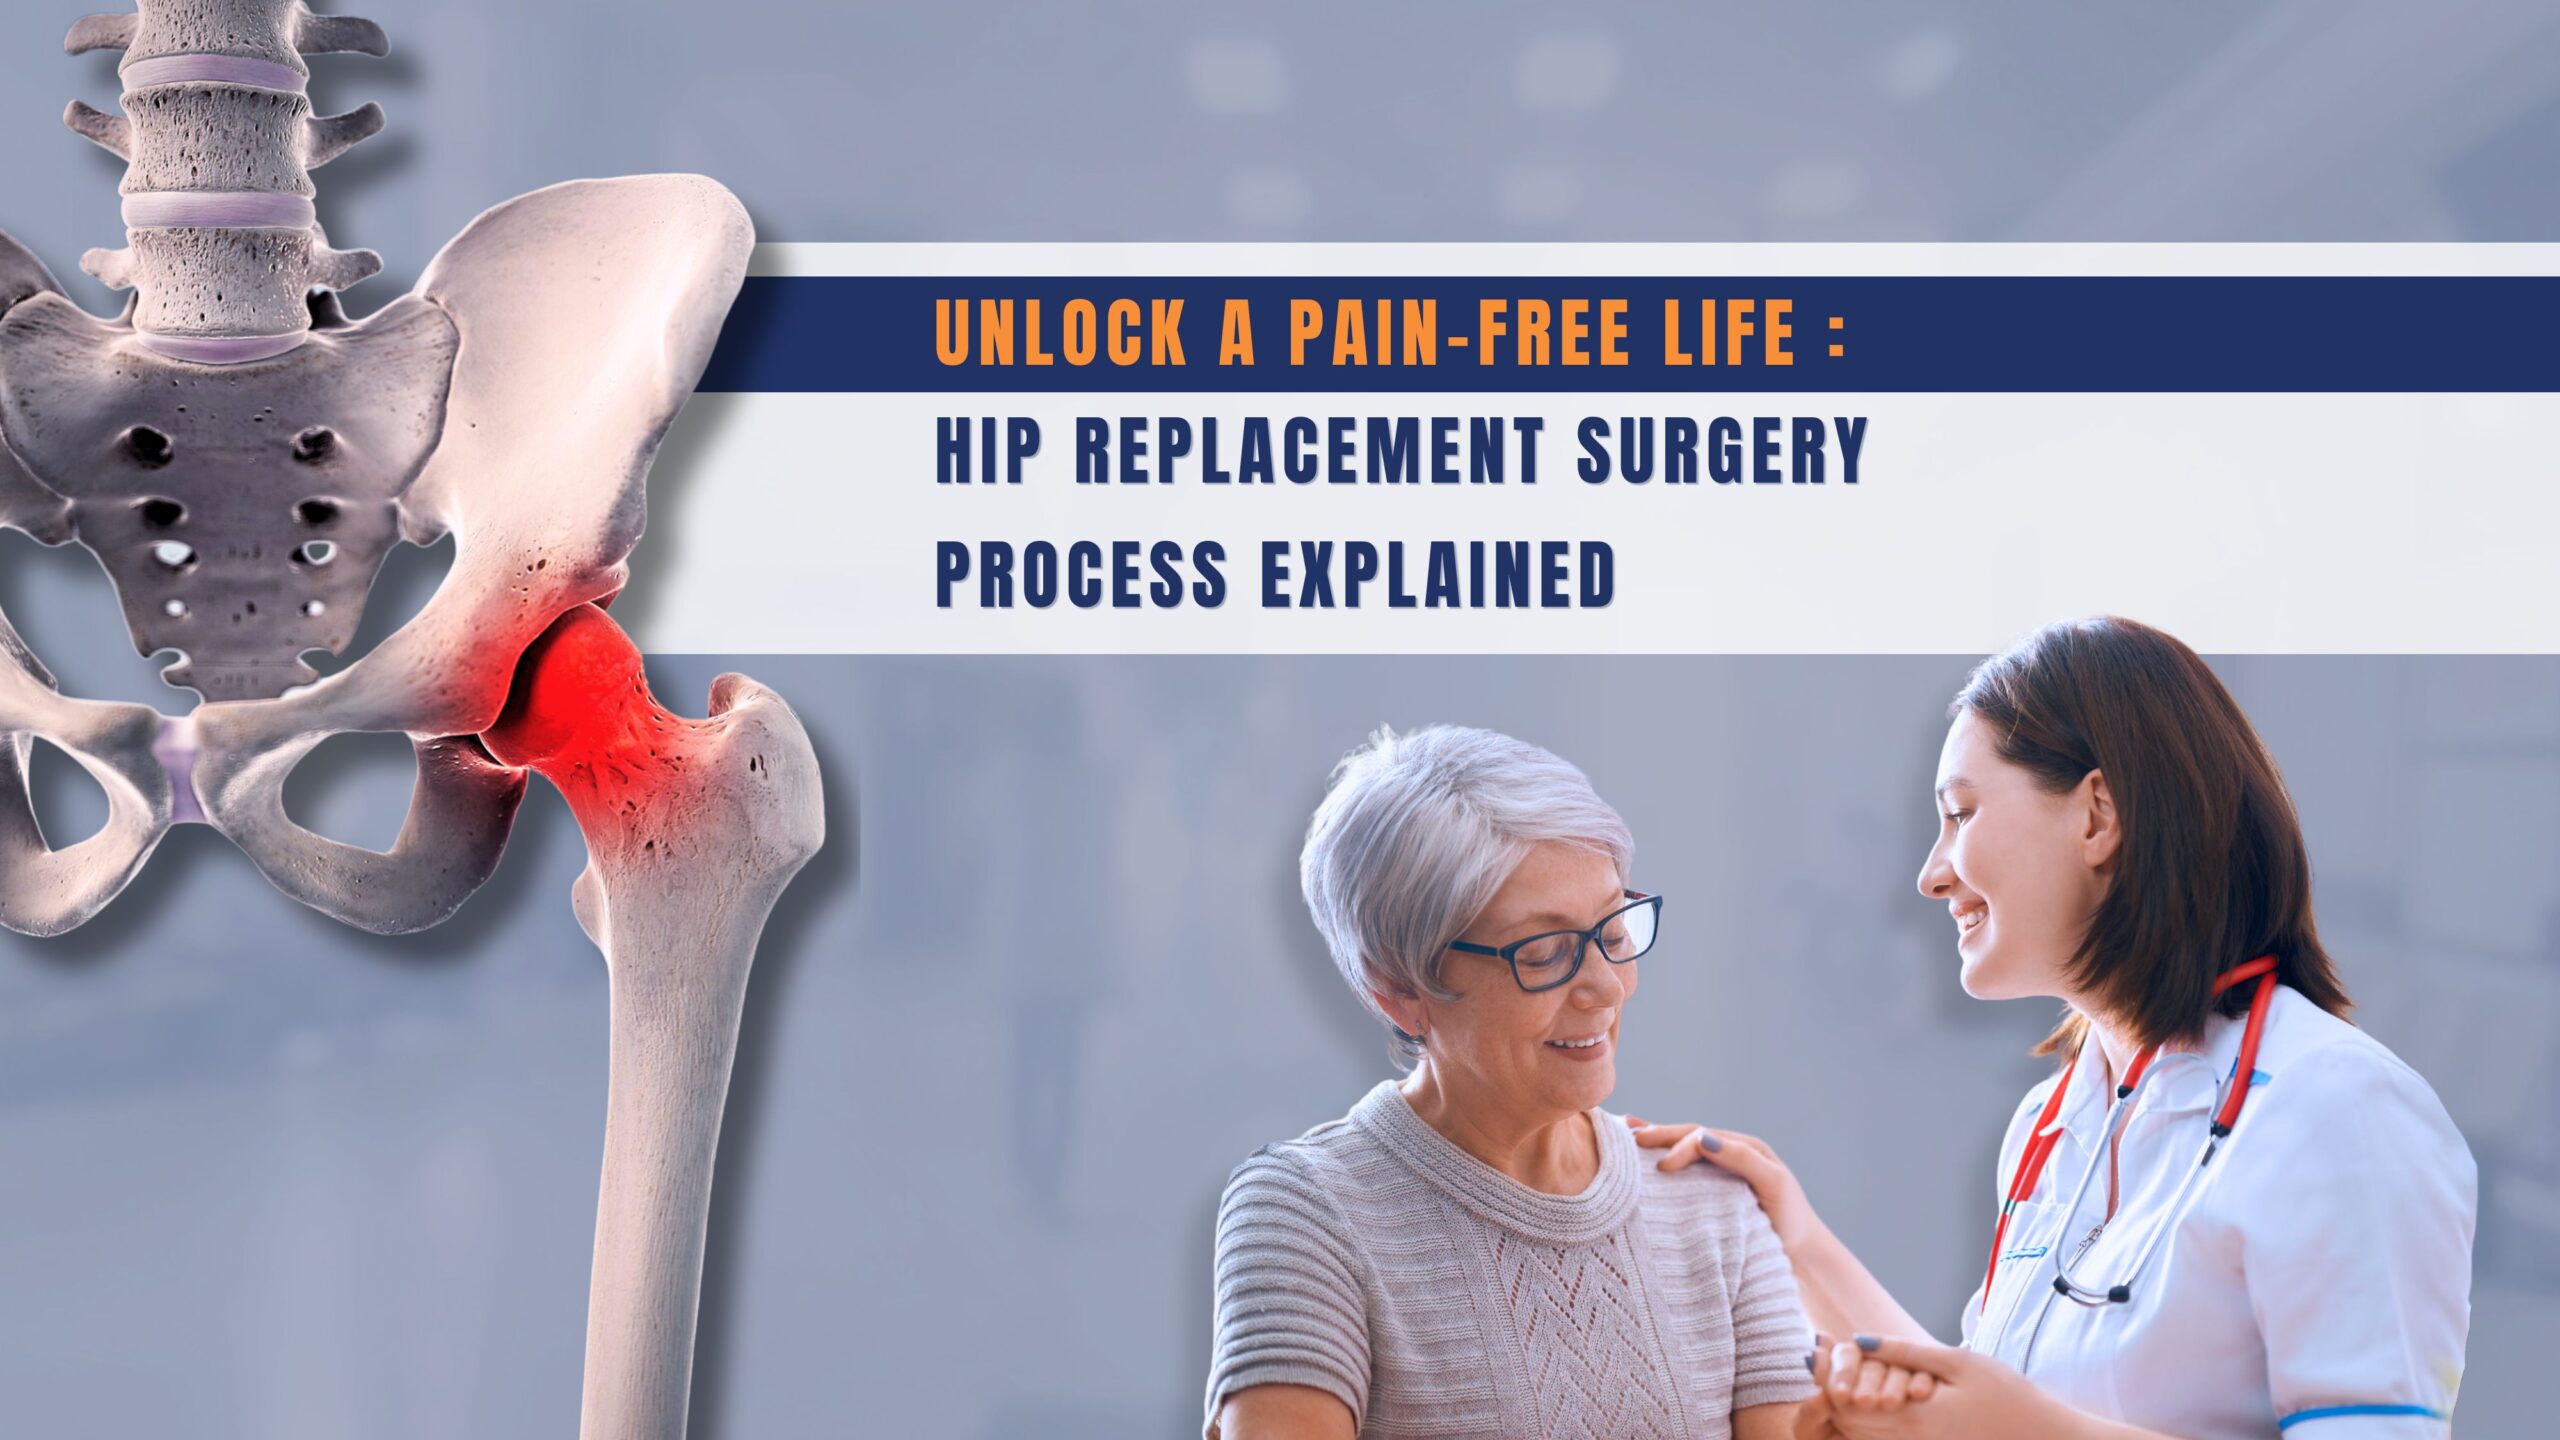 Unlock a Pain-Free Life: Hip Replacement Surgery Process Explained